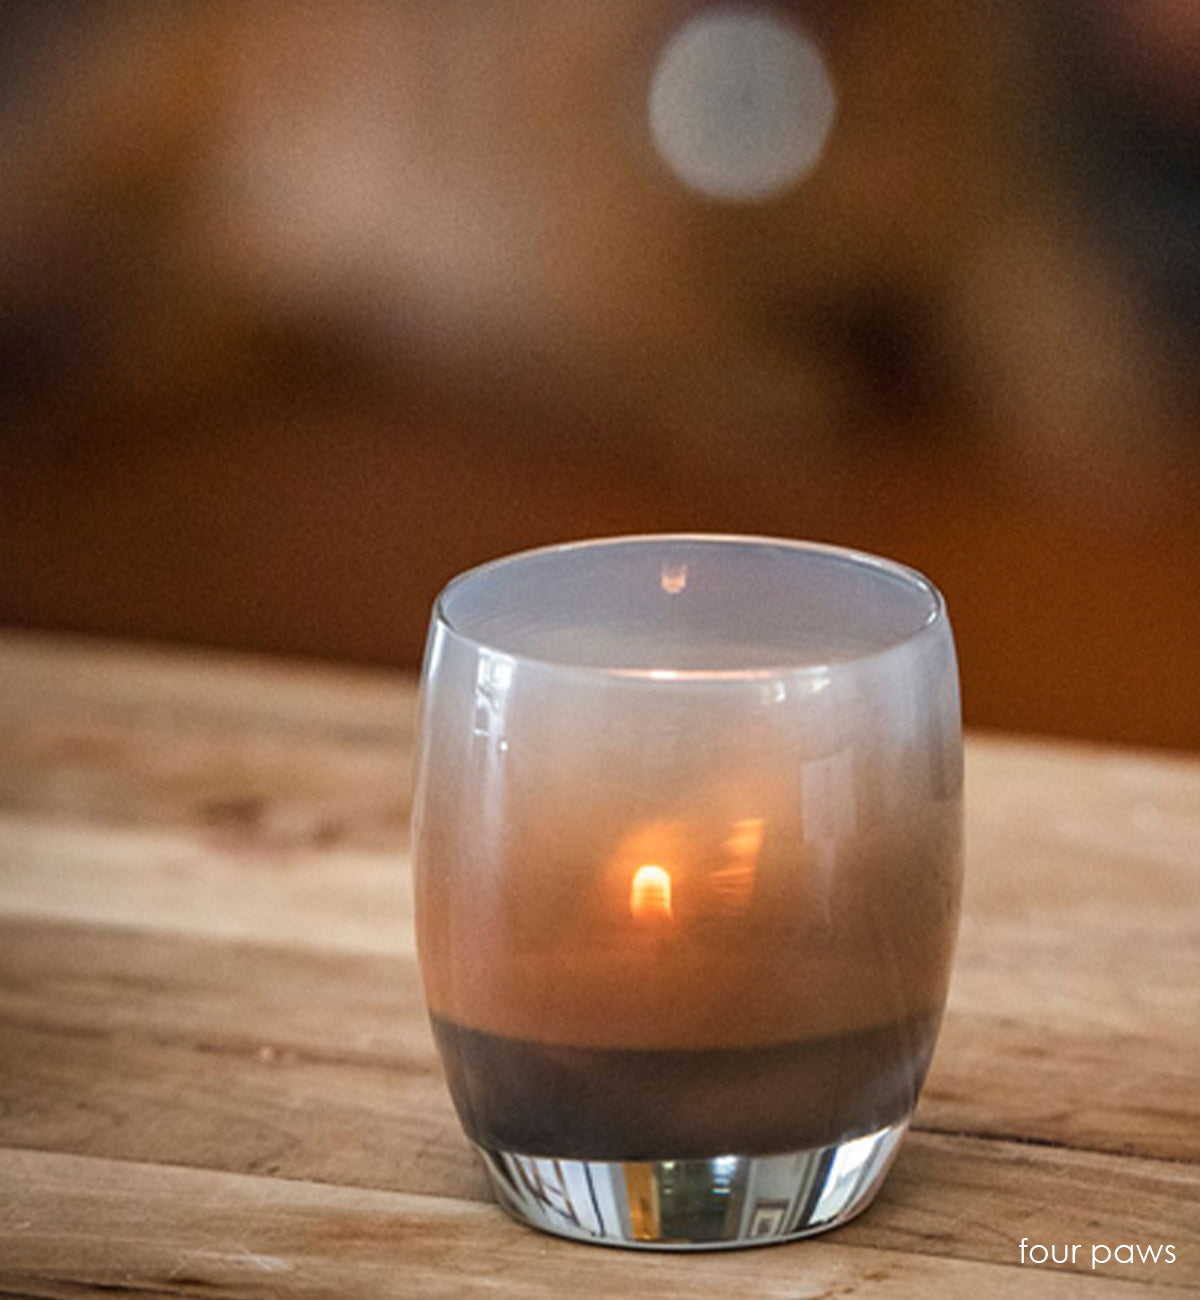 four paws smokey gray hand-blown glass votive candle holder.